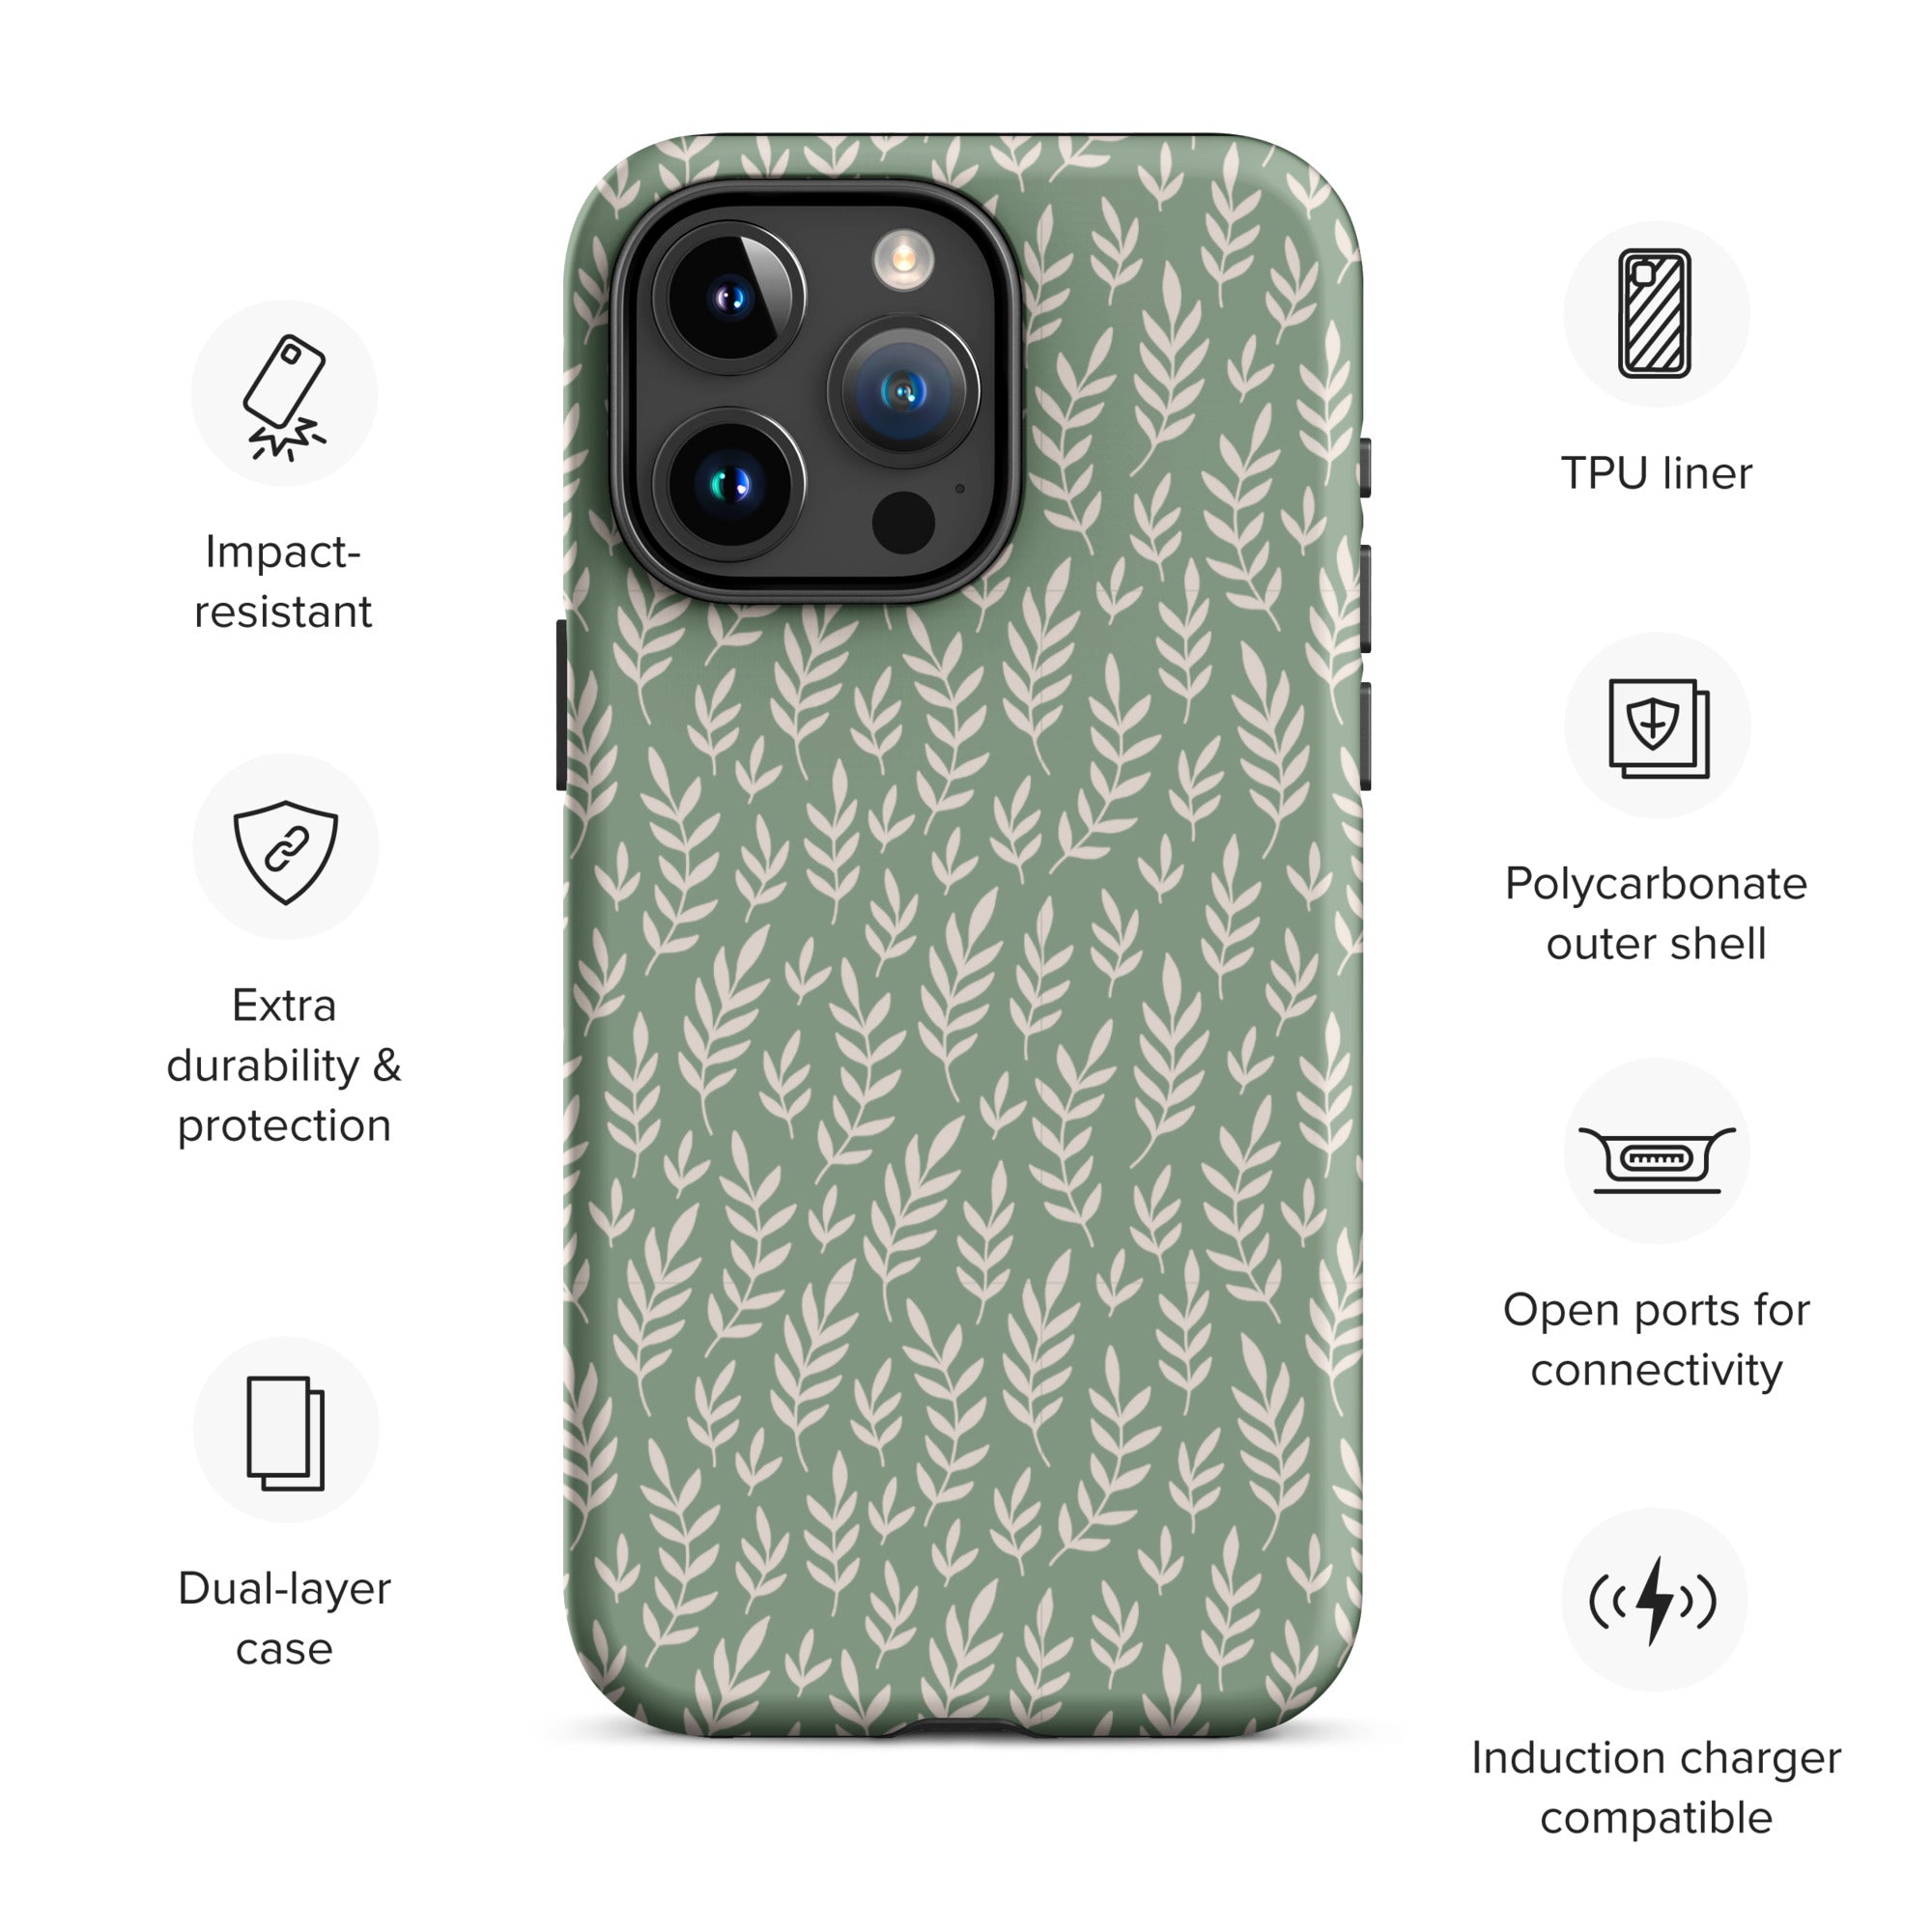 Unbe-LEAF-able - Tough Case for iPhone®